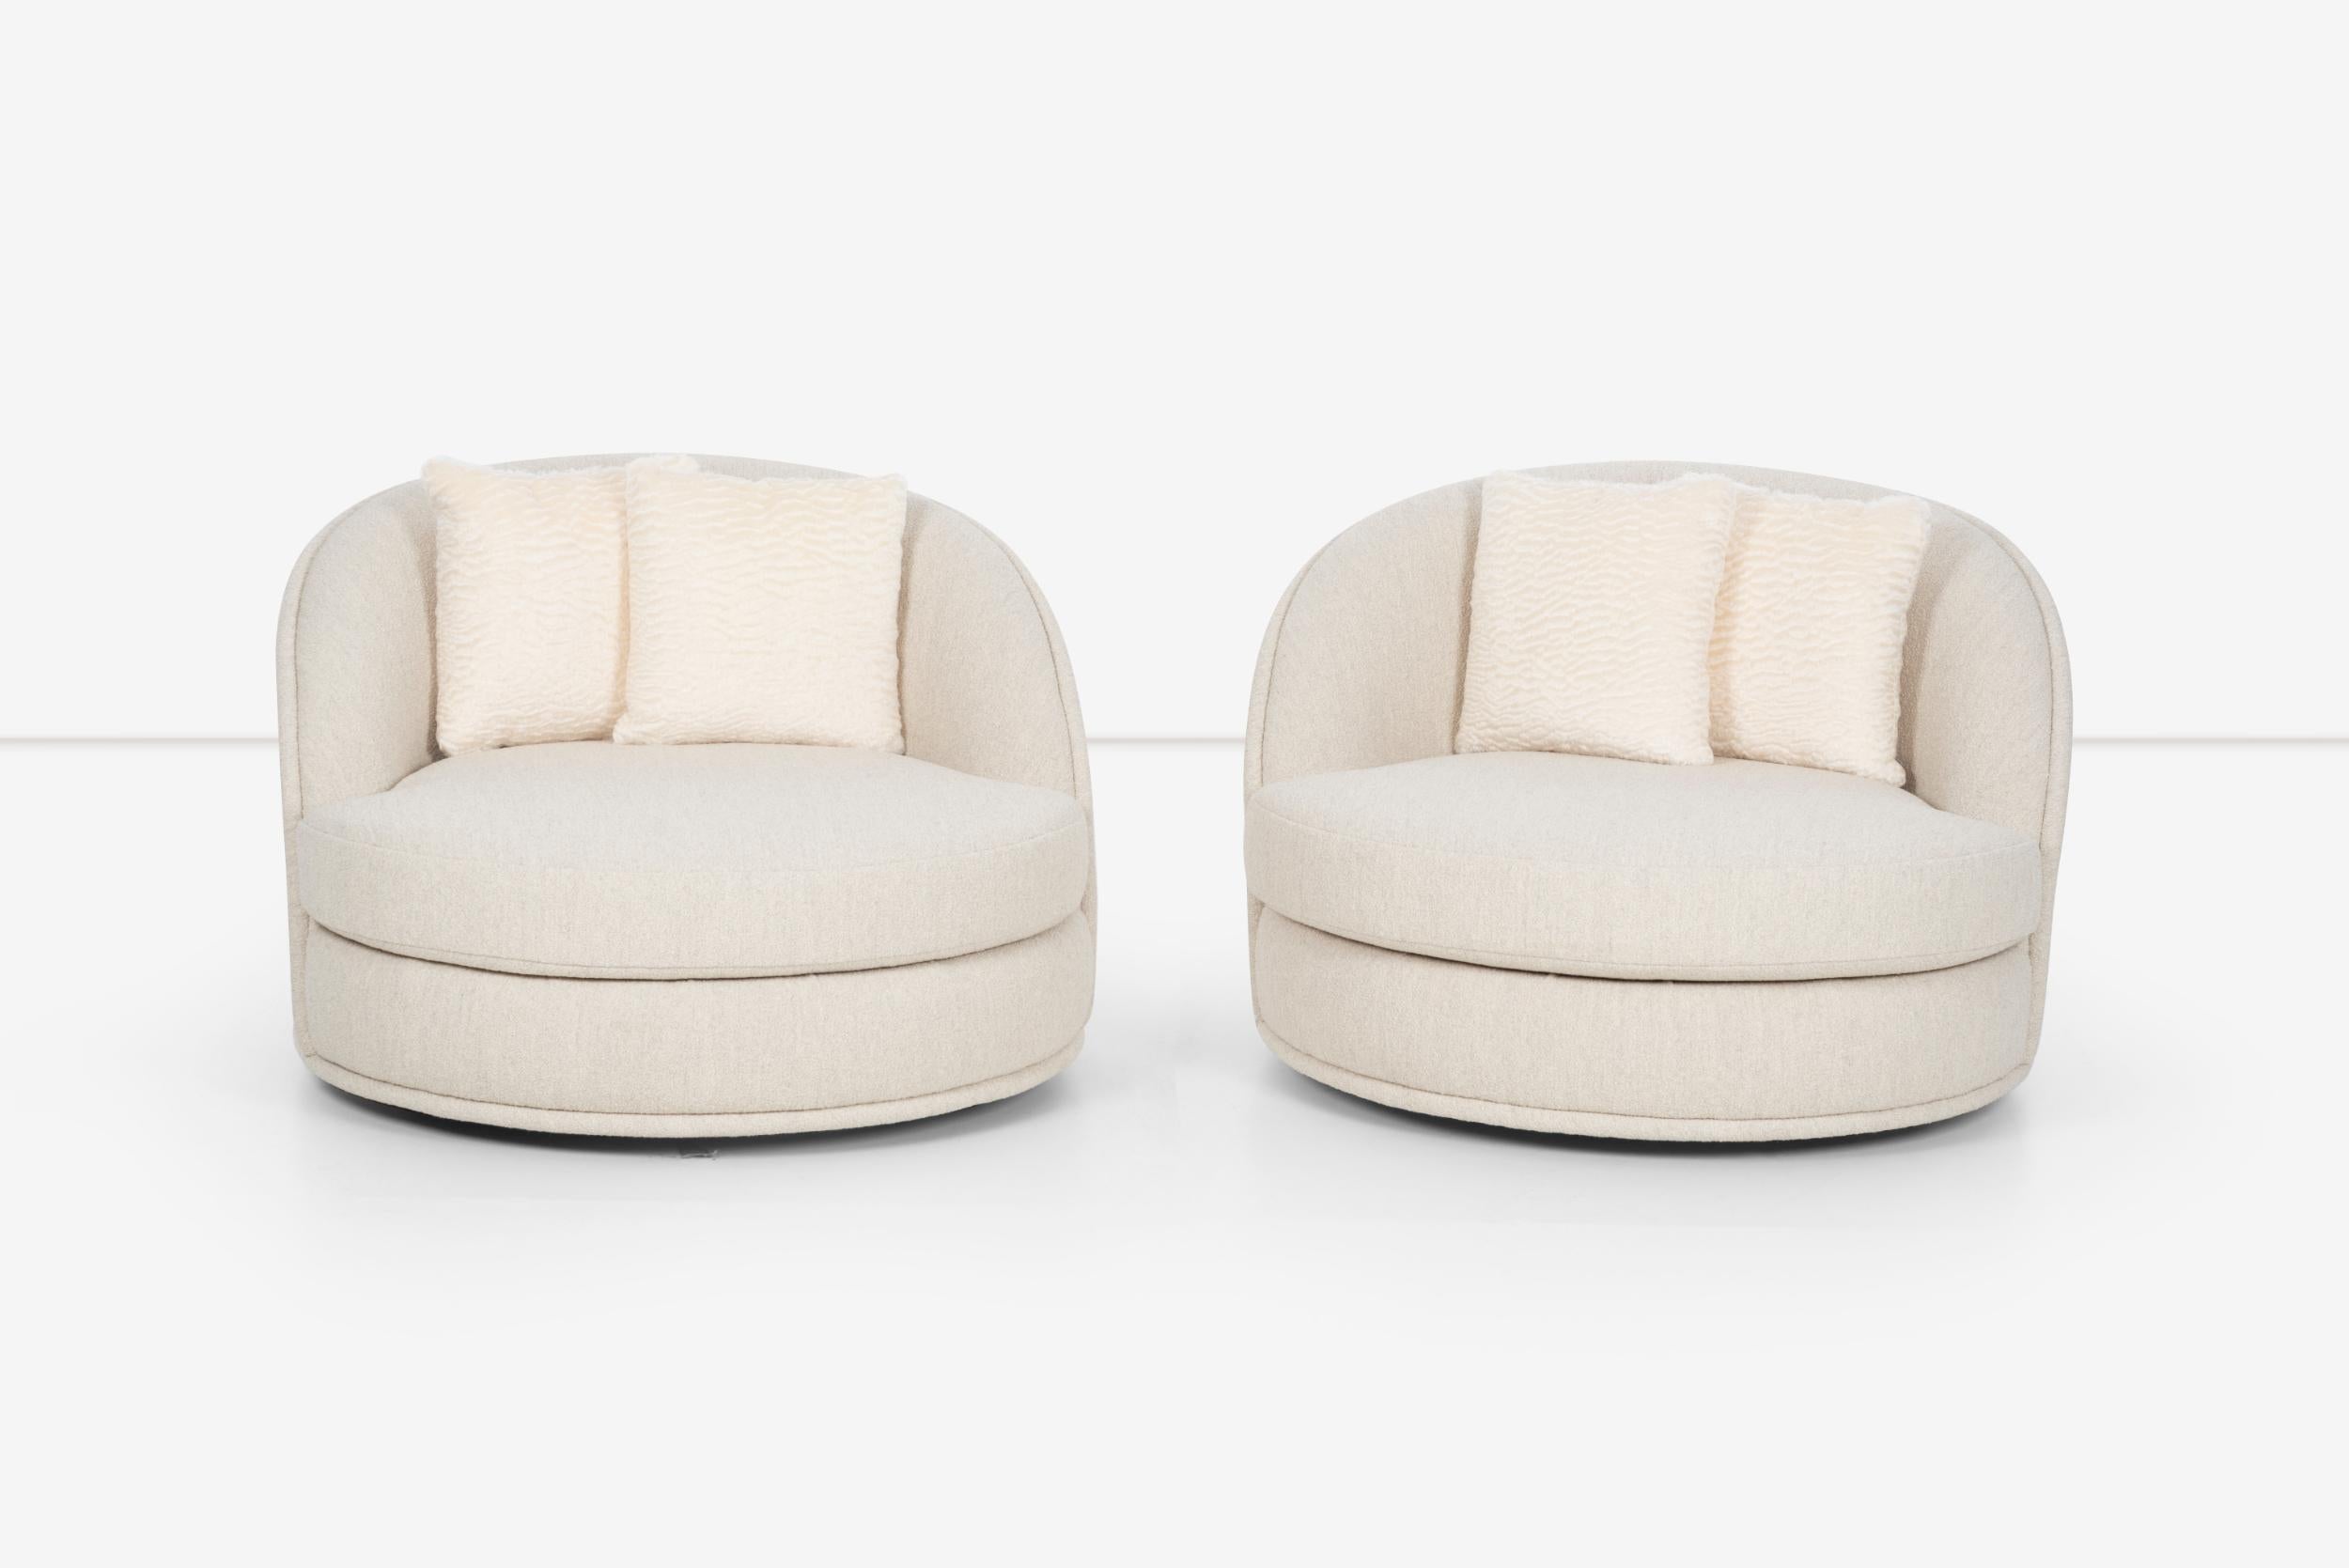 Pair of Milo Baughman Style oversized swivel lounge chairs by Directional, Reupholstered in Italian Boucle.
Pillows; Faux lamb Great Plains, Tusk 100% mohair

Measures: Seat Height: 16